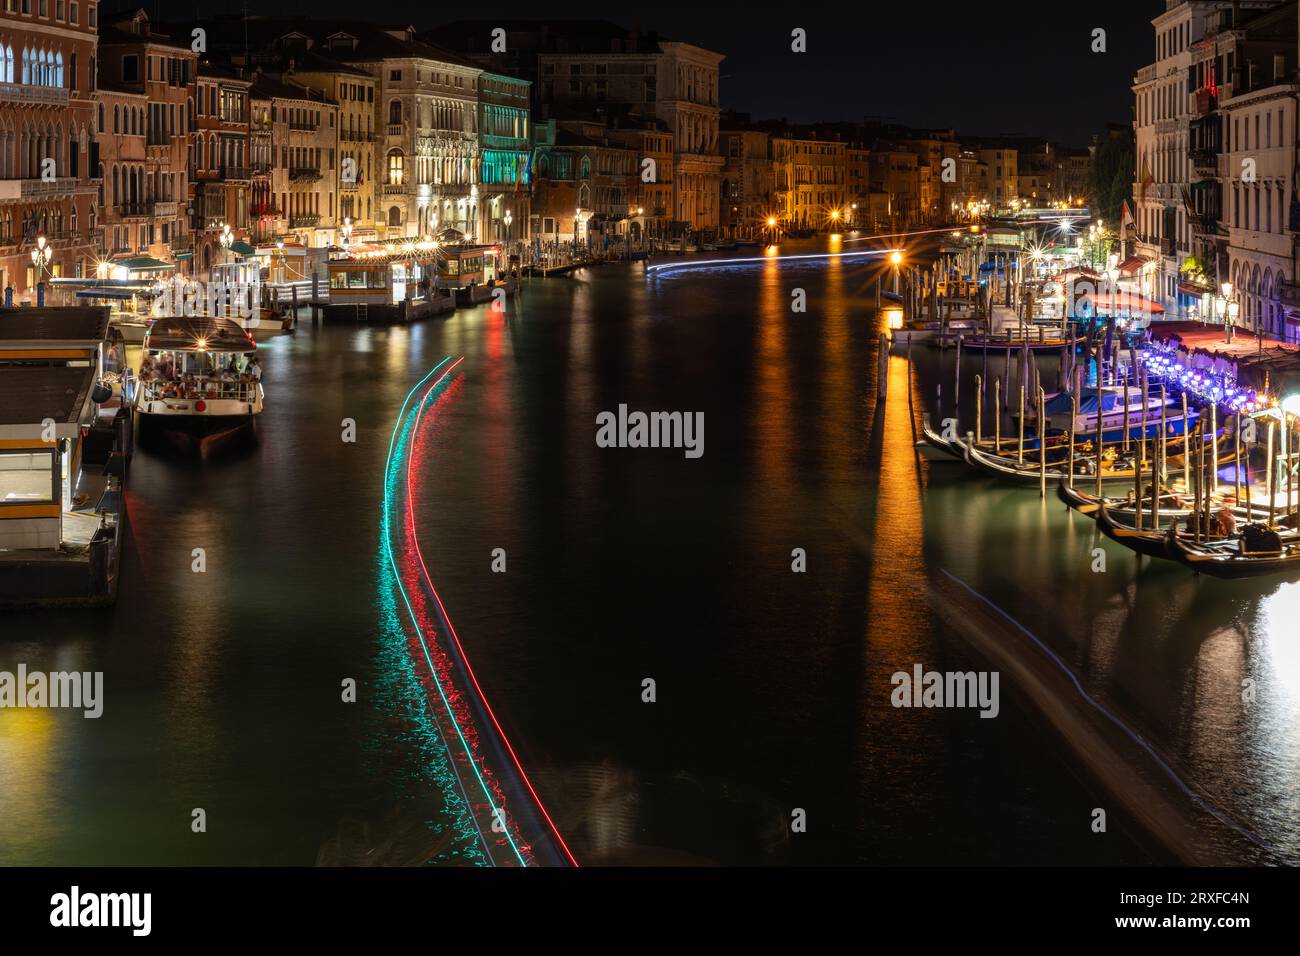 View of Grand Canal Venice at night, with gondolas, Venice Italy, long exposure Stock Photo